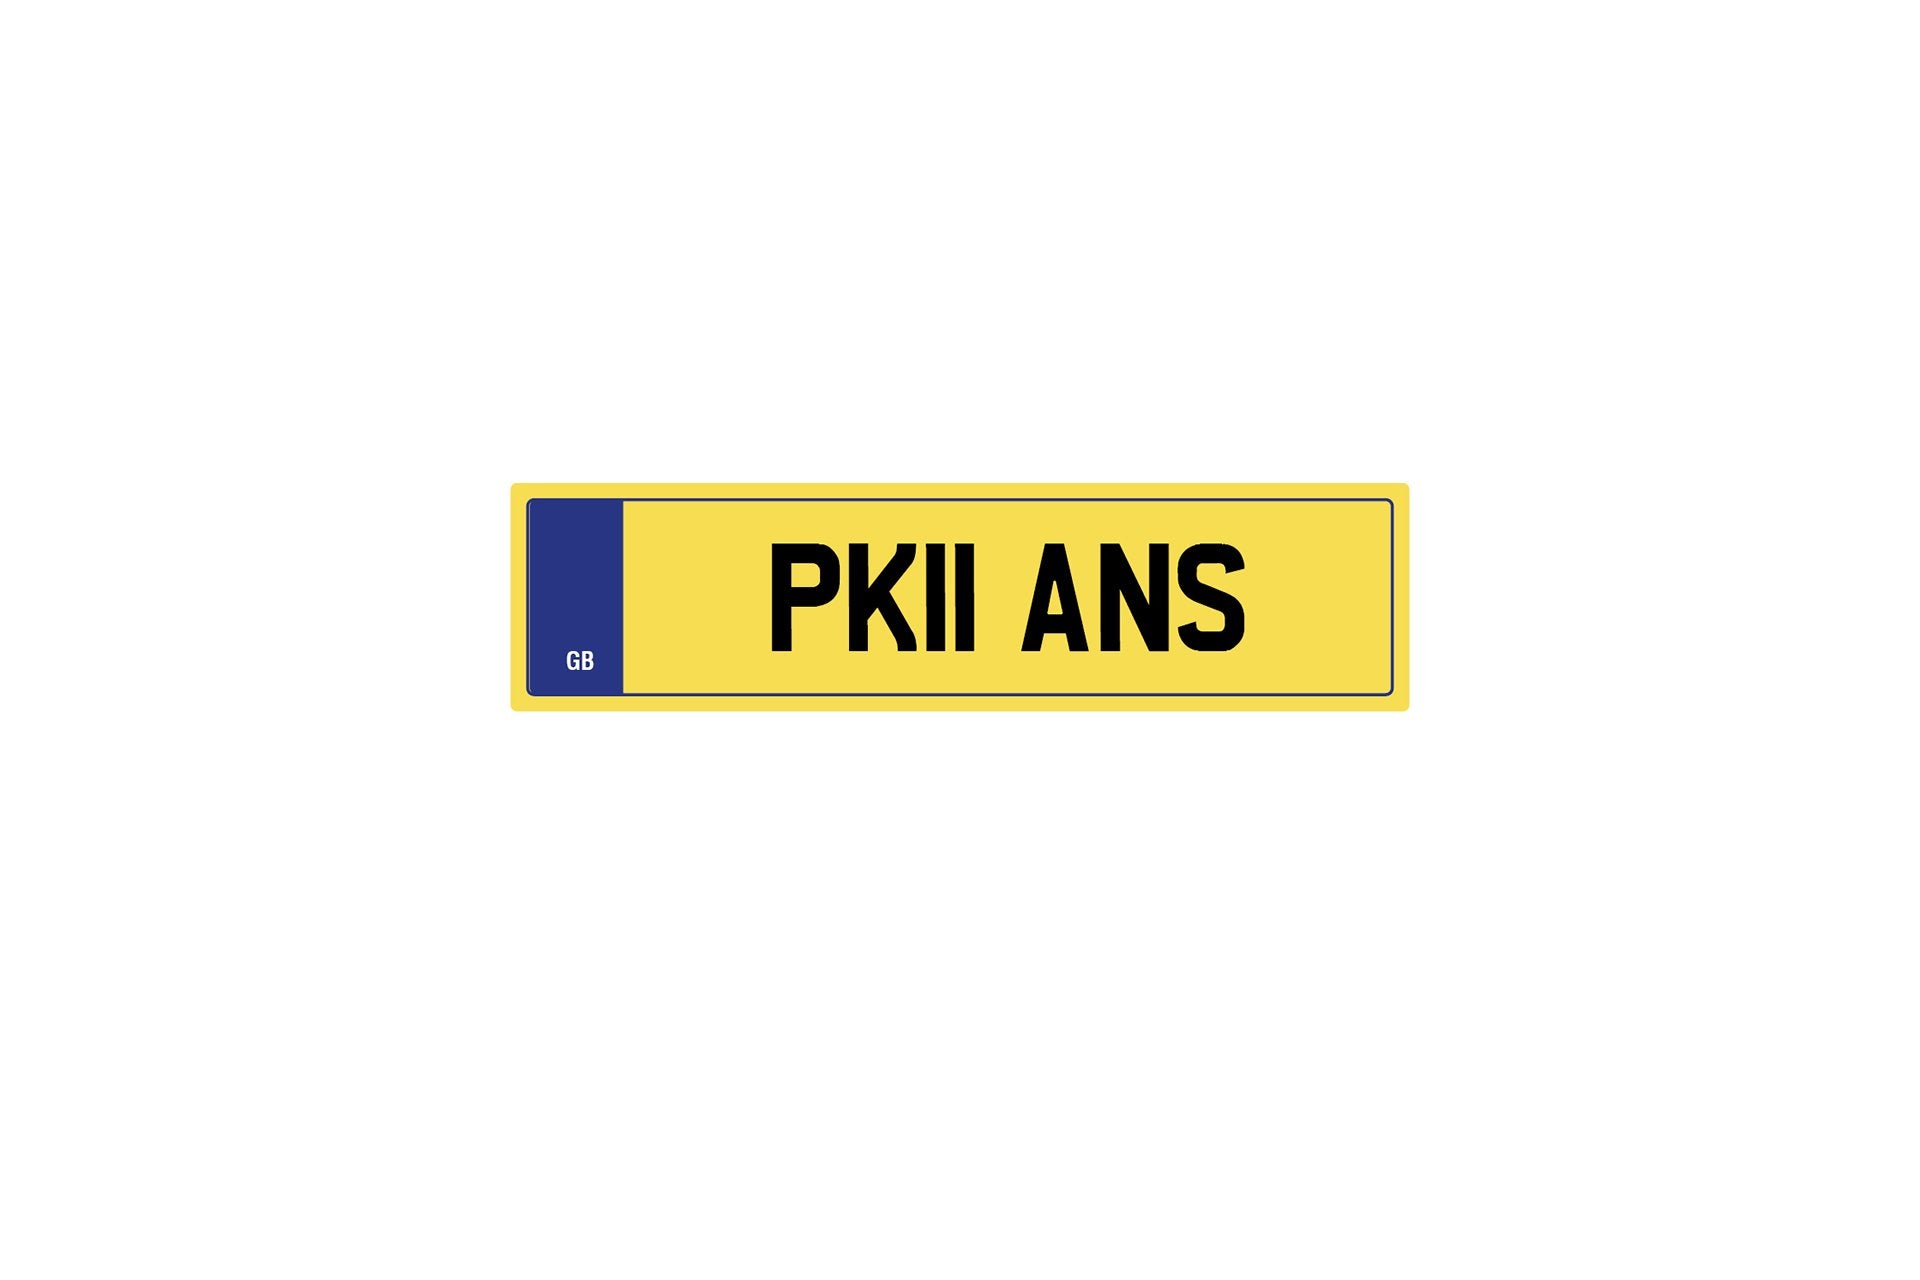 Private Plate Pk11 Ans by Kahn - Image 177